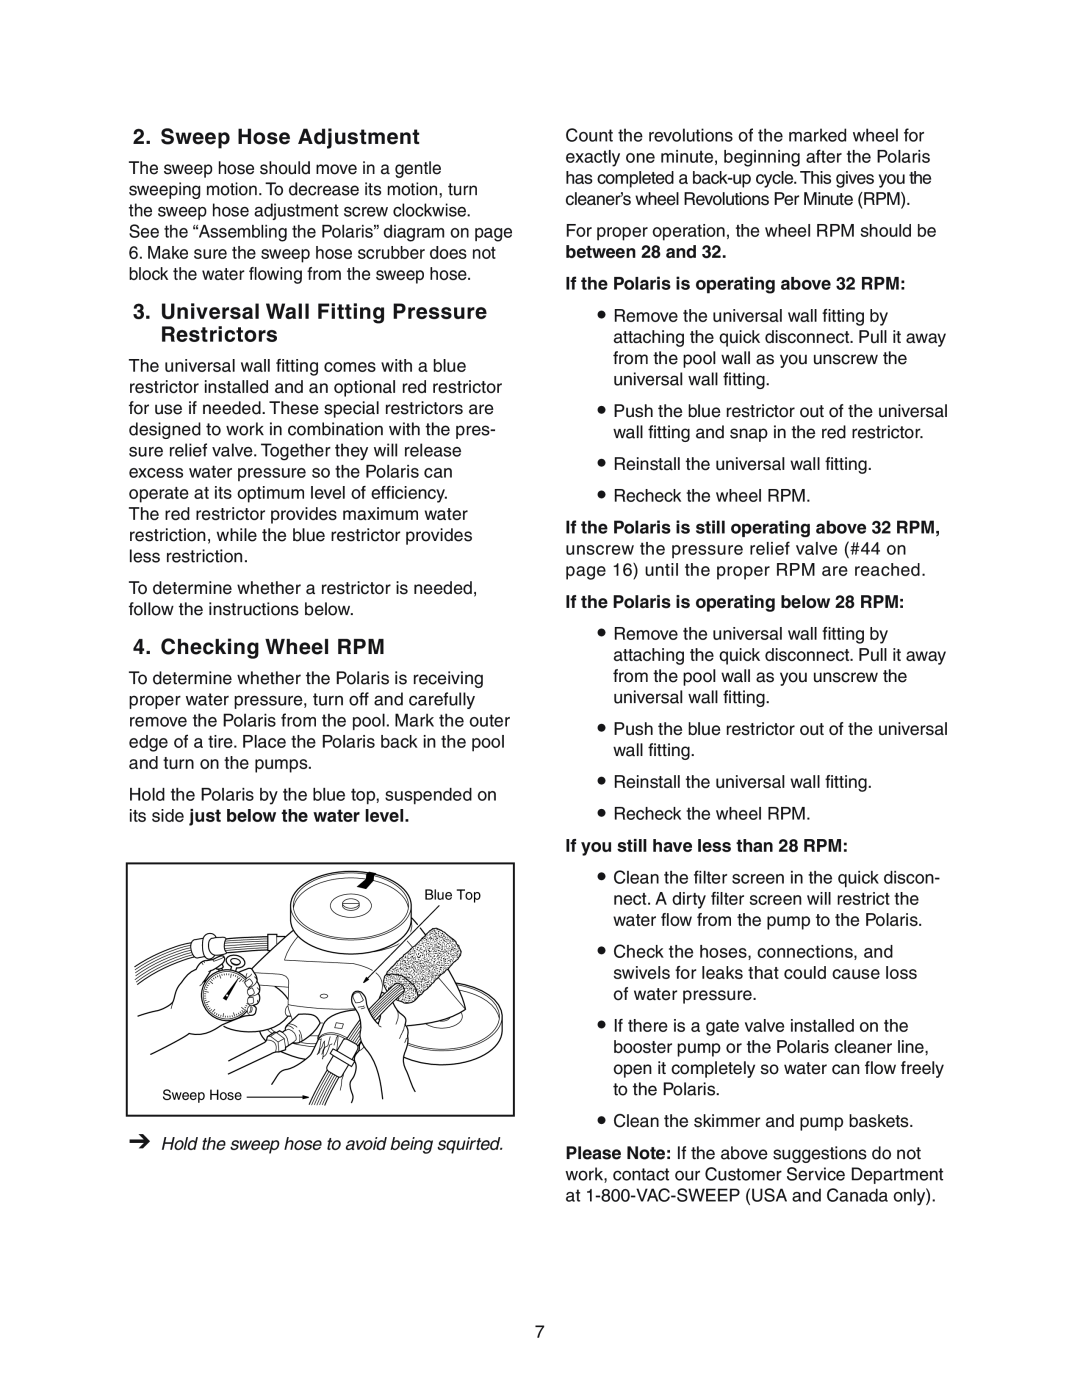 Polaris 380 owner manual Sweep Hose Adjustment, Universal Wall Fitting Pressure Restrictors, Checking Wheel RPM 